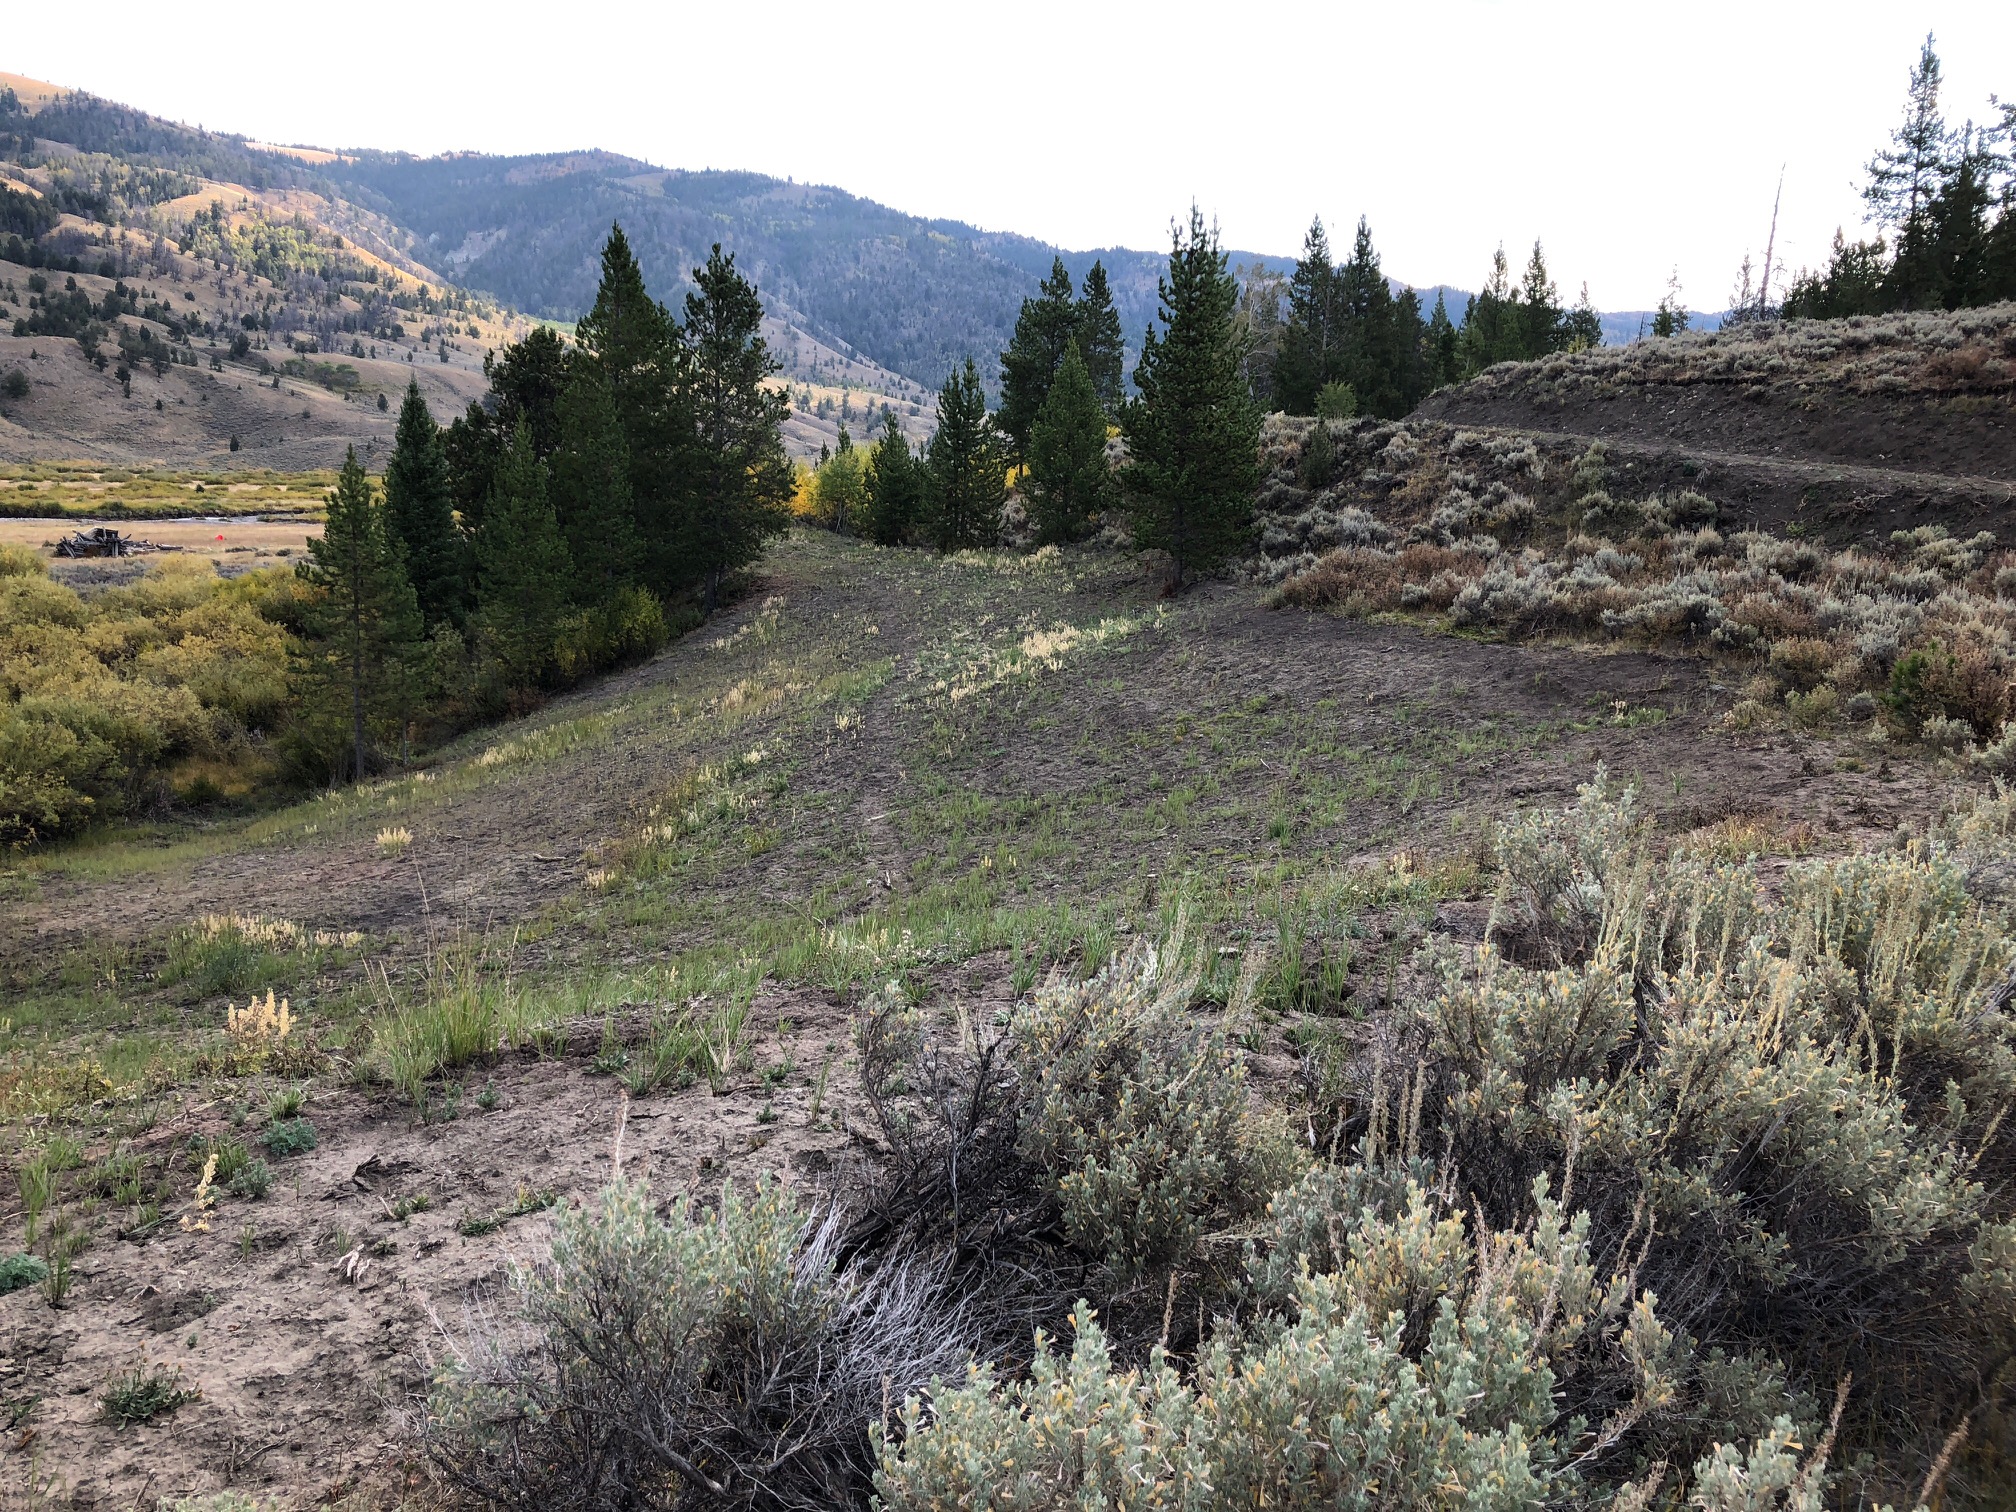 Now you see it, now you don’t - a large irrigation ditch that used to cut off the tributary streams on the property has been decommissioned and reclaimed and is growing back with native vegetation.